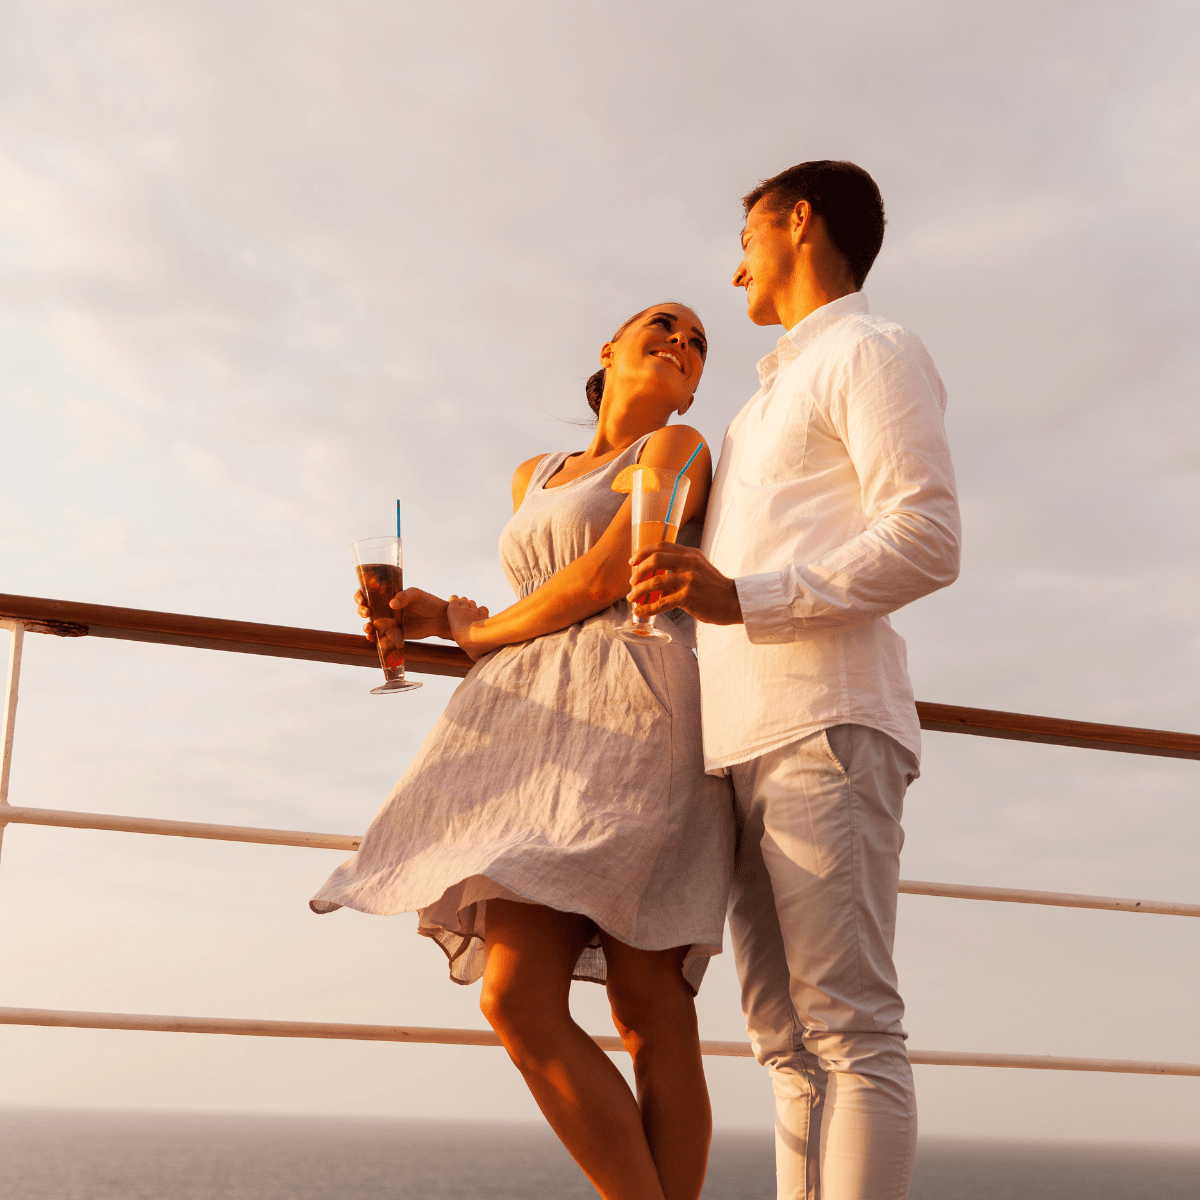 Couple on a cruise, having a romantic moment